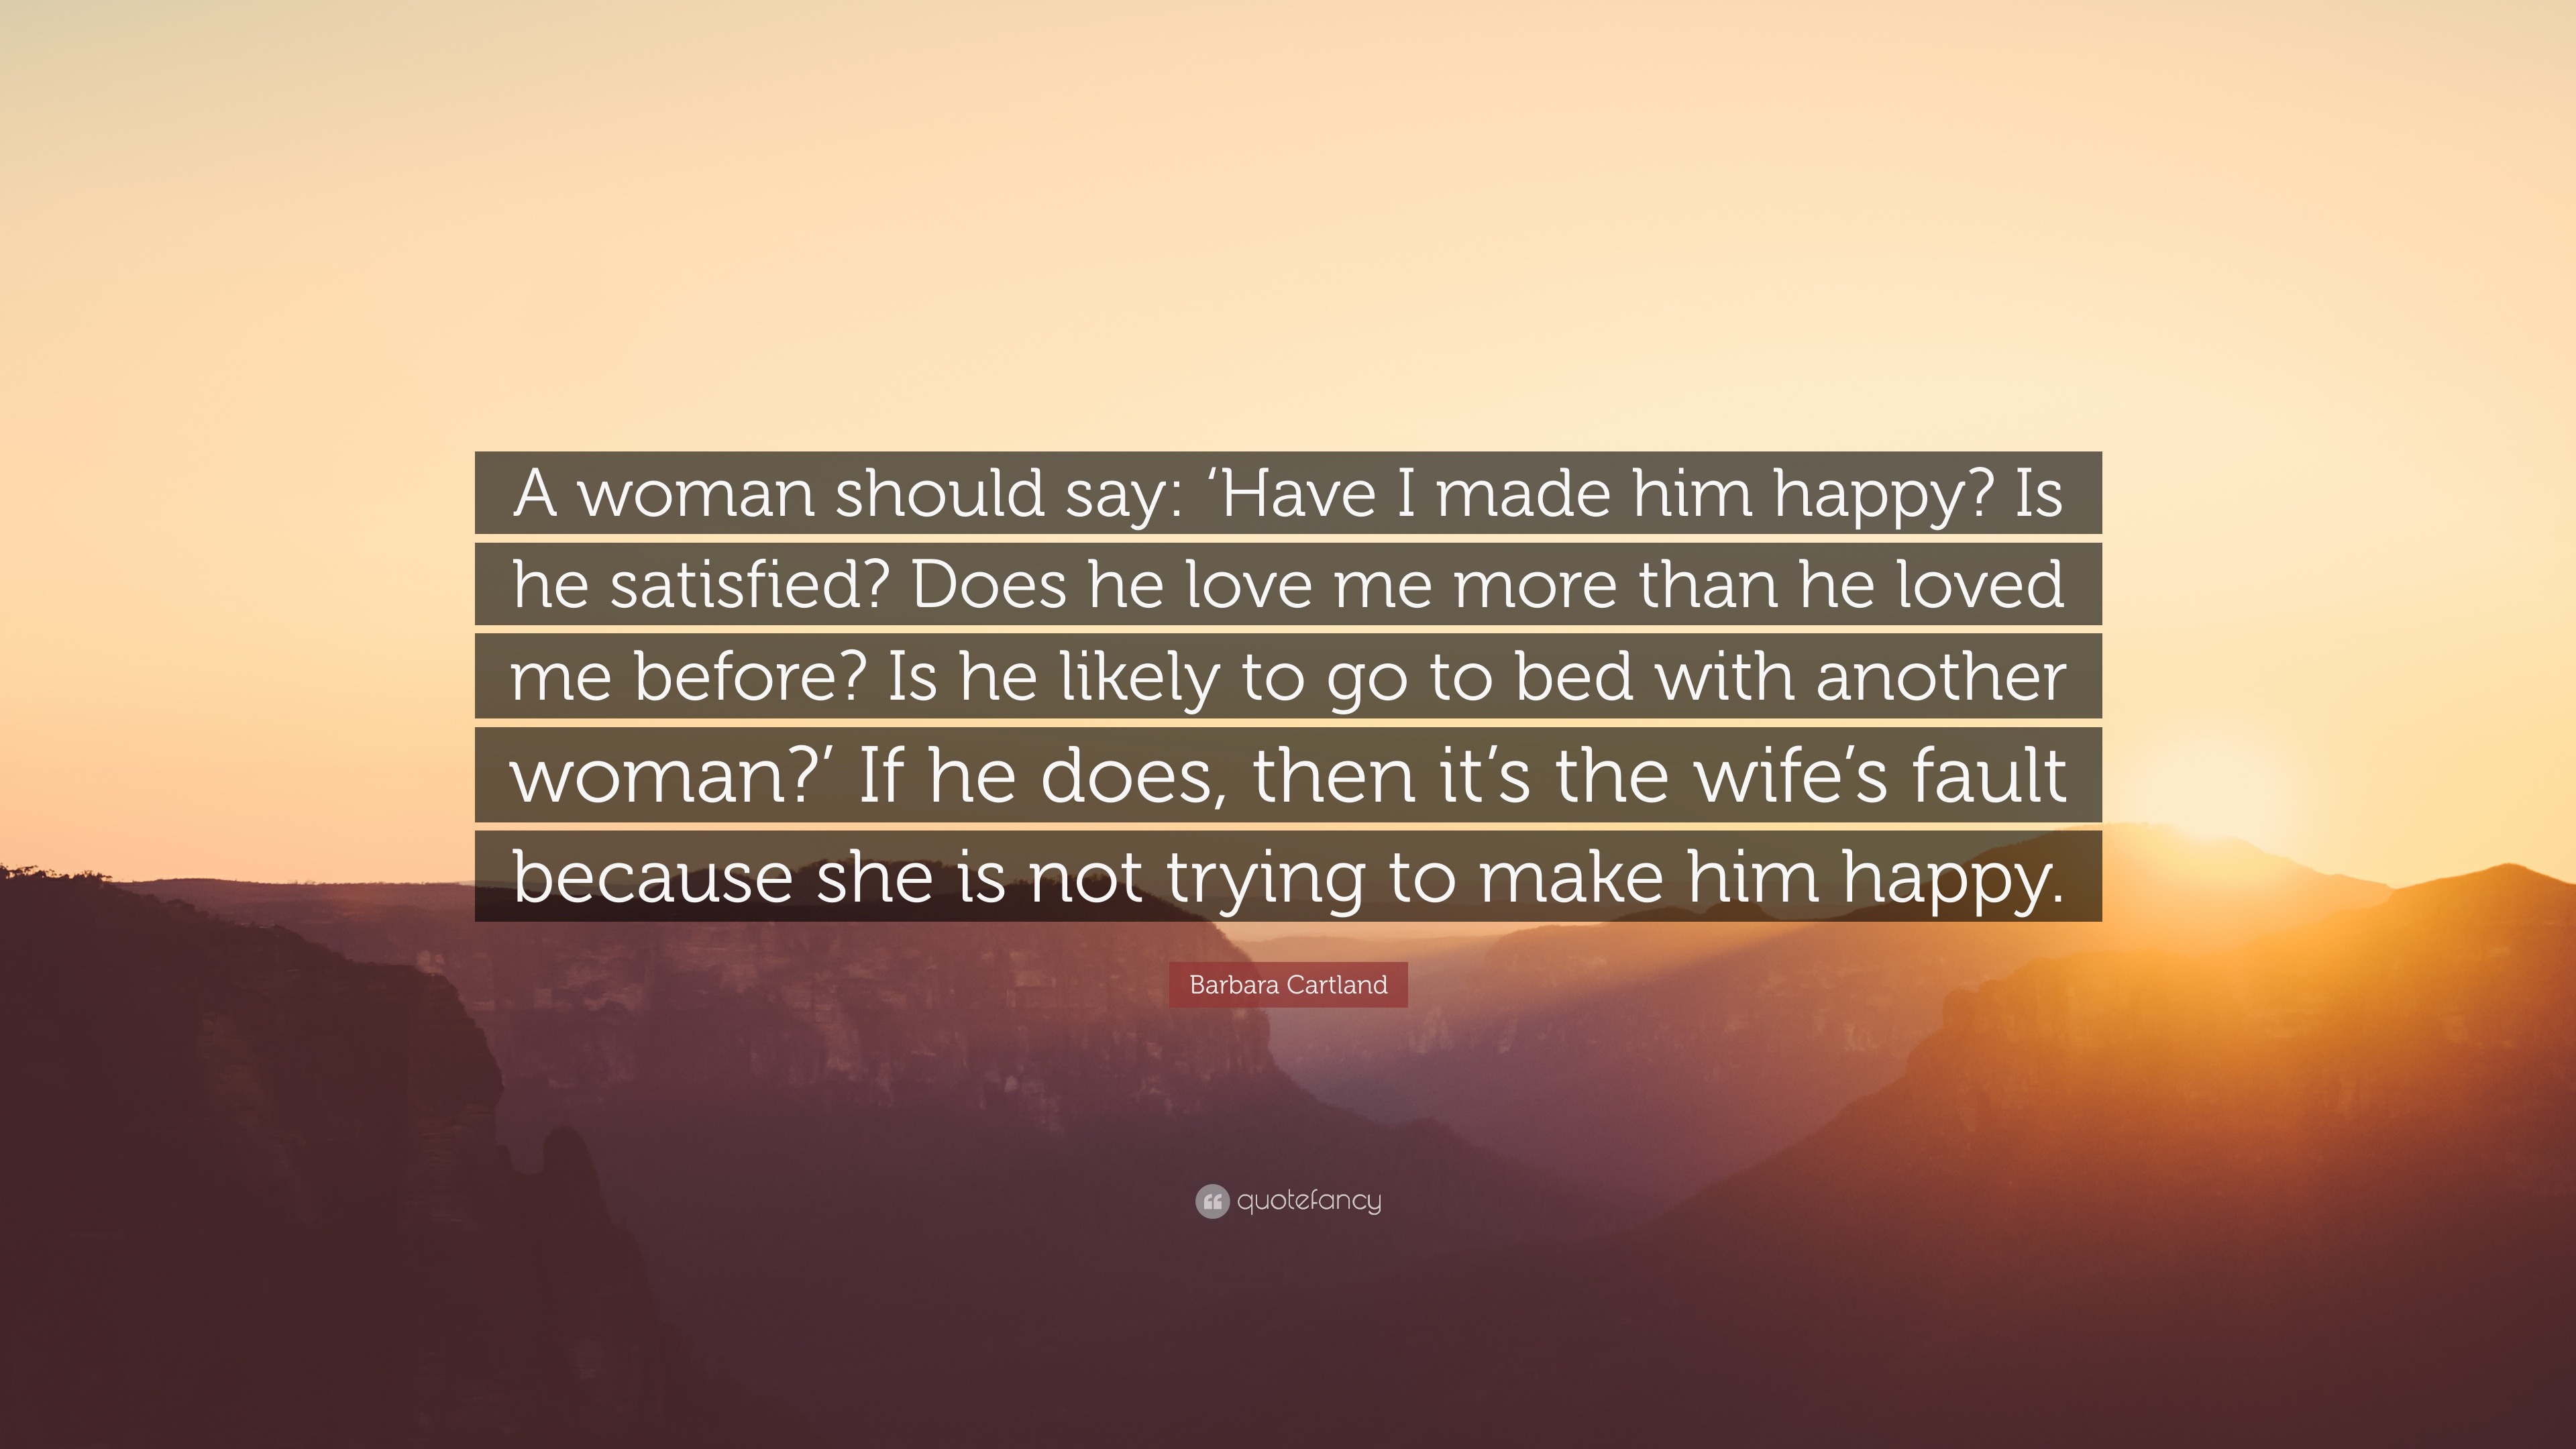 Barbara Cartland Quote: “A woman should say: ‘Have I made him happy? Is ...